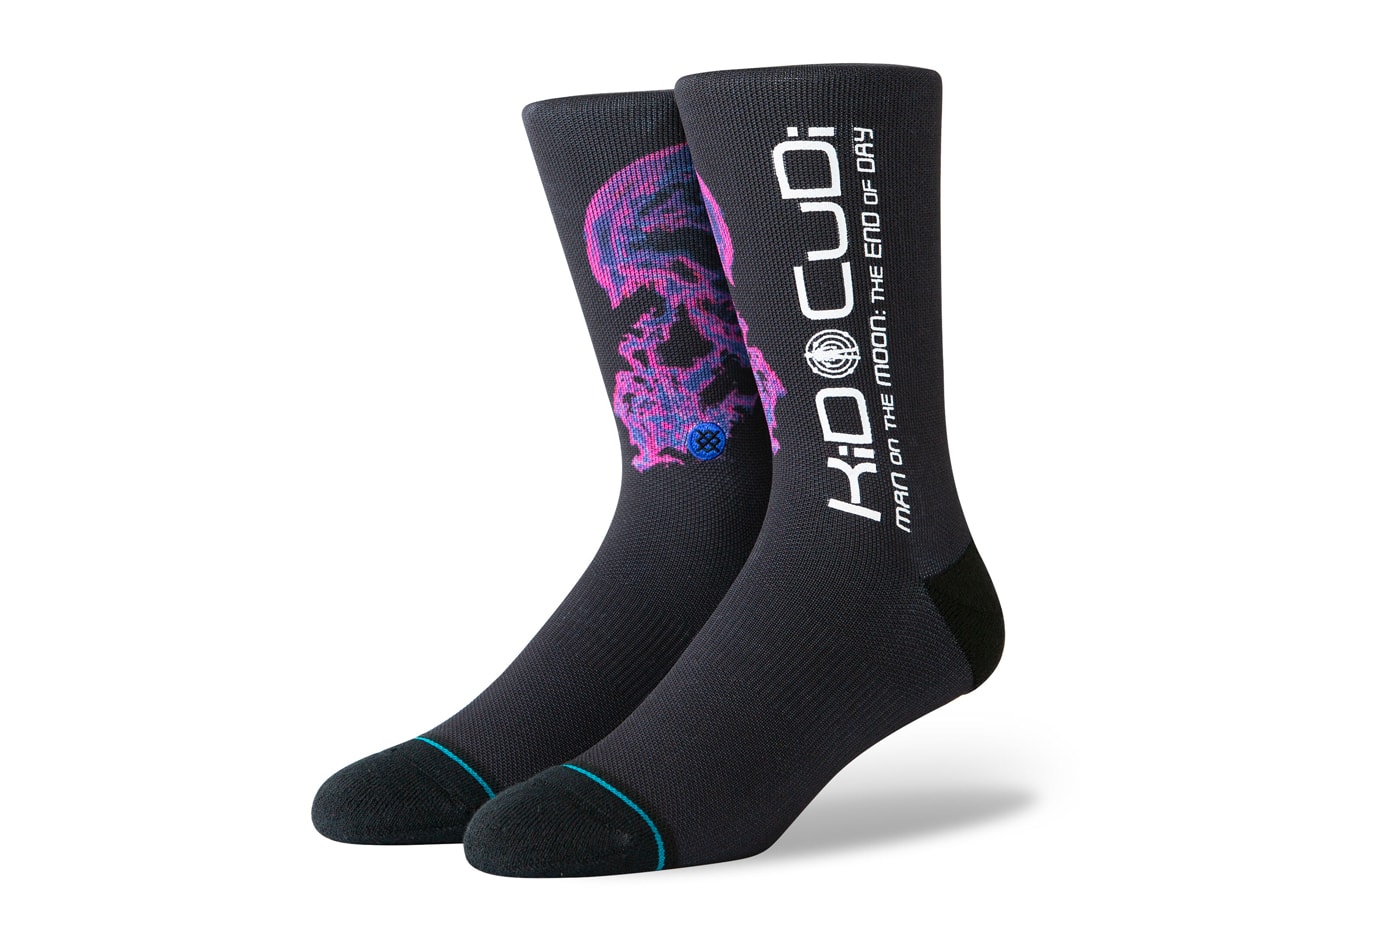 Kid Cudi Man on the Moon The End of Day Stance Socks Anniversary Capsule